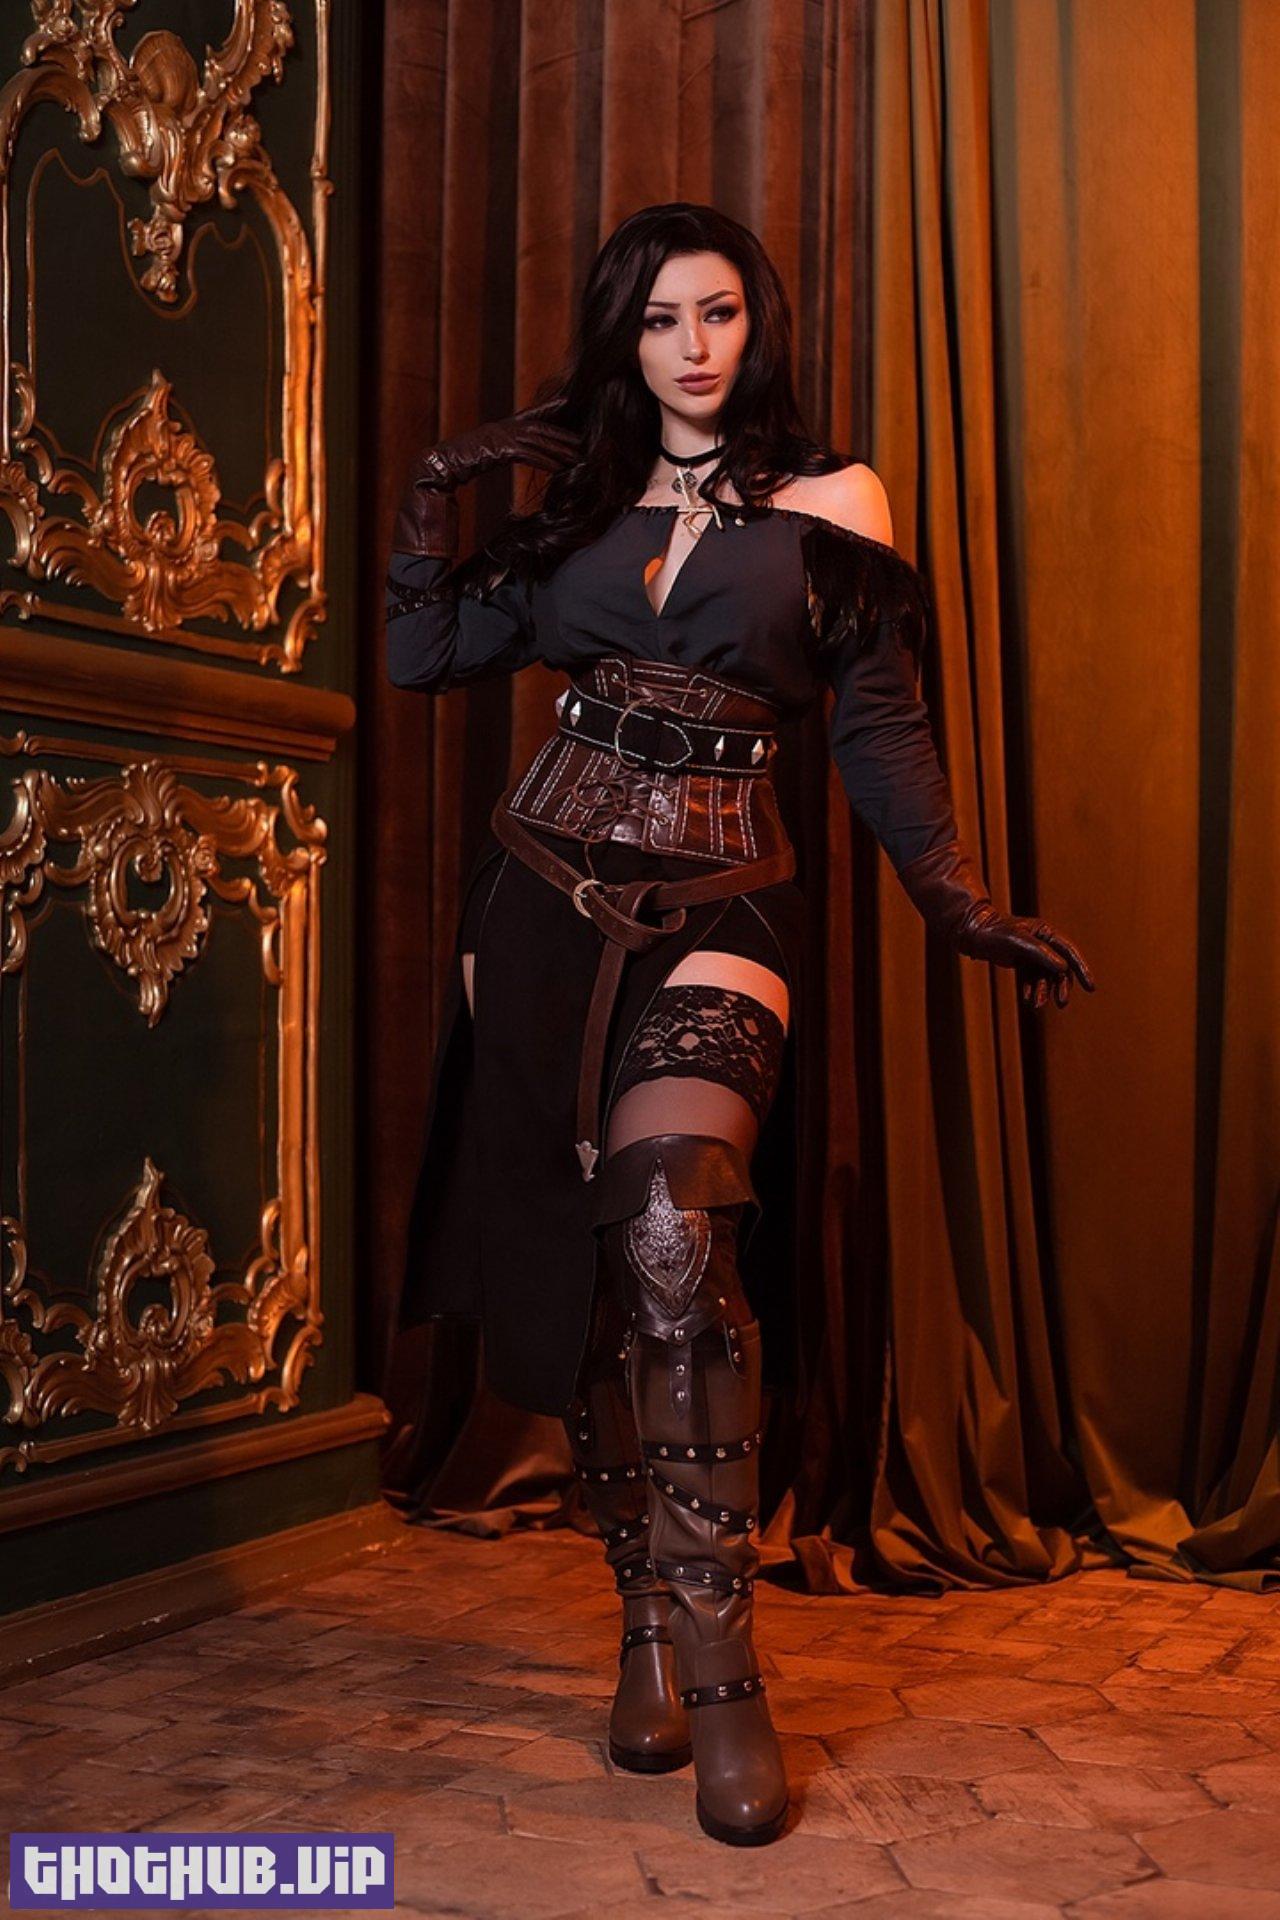 Hot Yennefer (The Witcher) Lady Melamory (35 Pictures) Leaked On Thothub